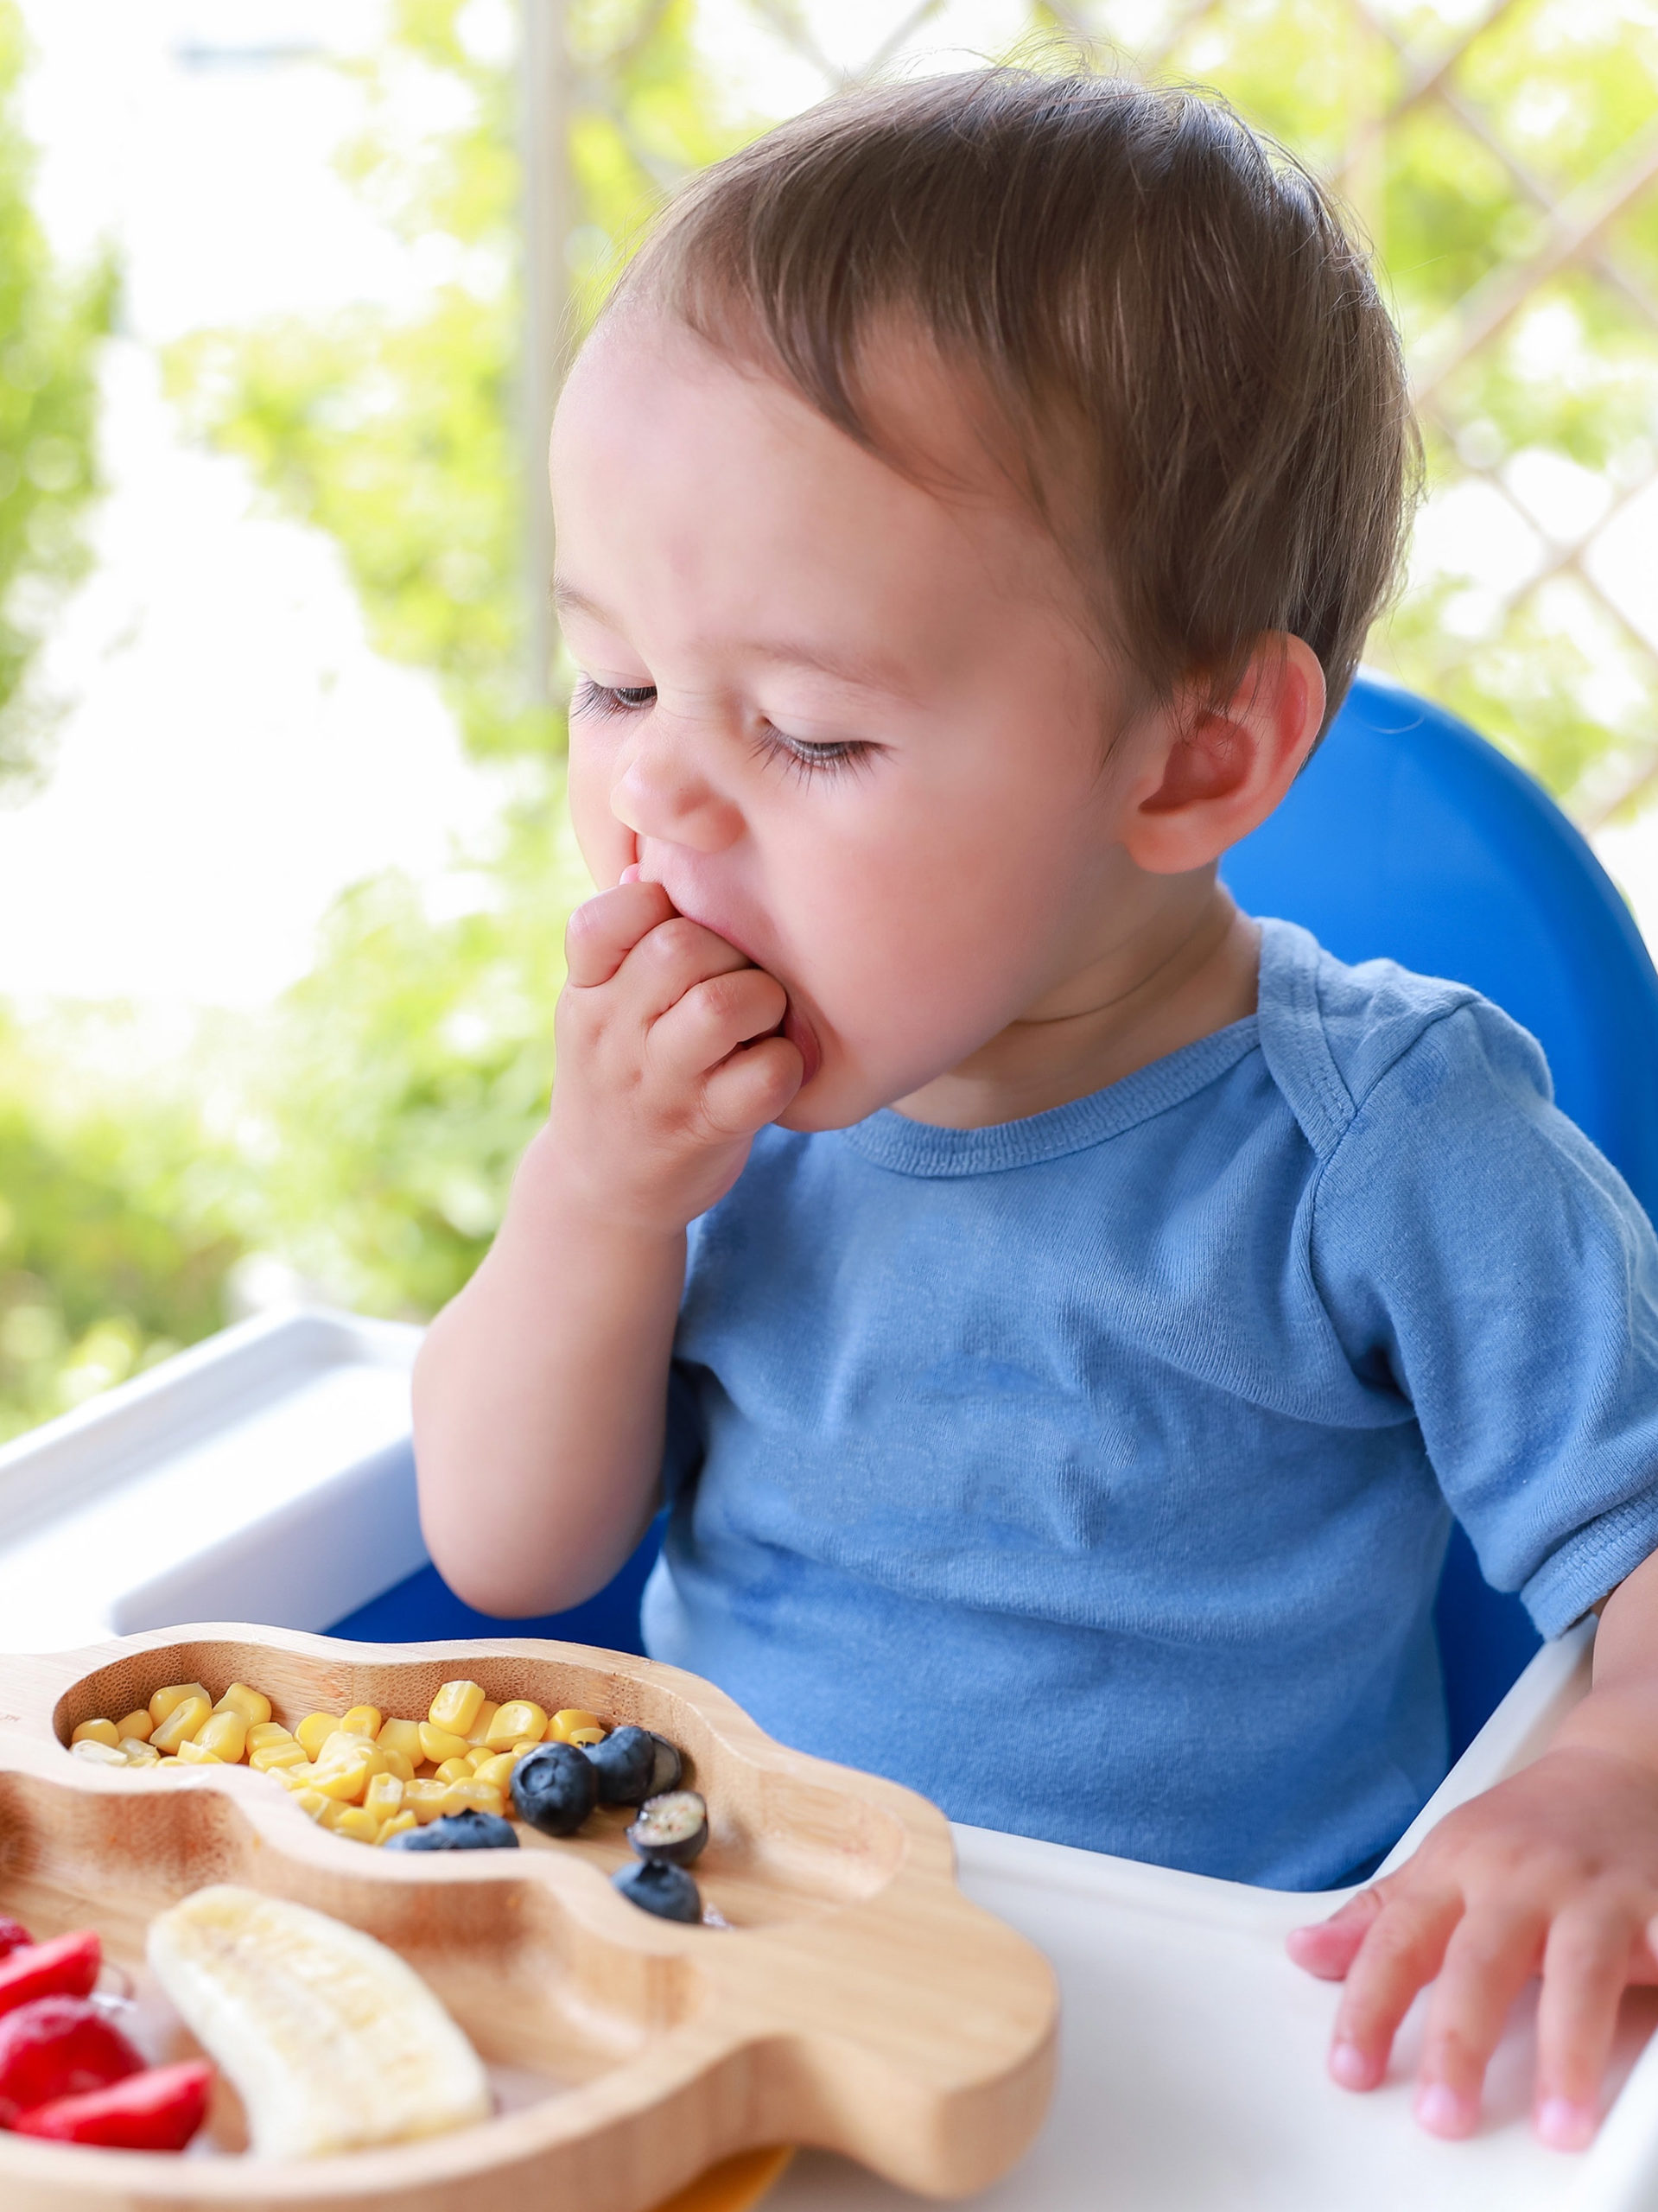 boy eating fruit and veggies by himself on high chair